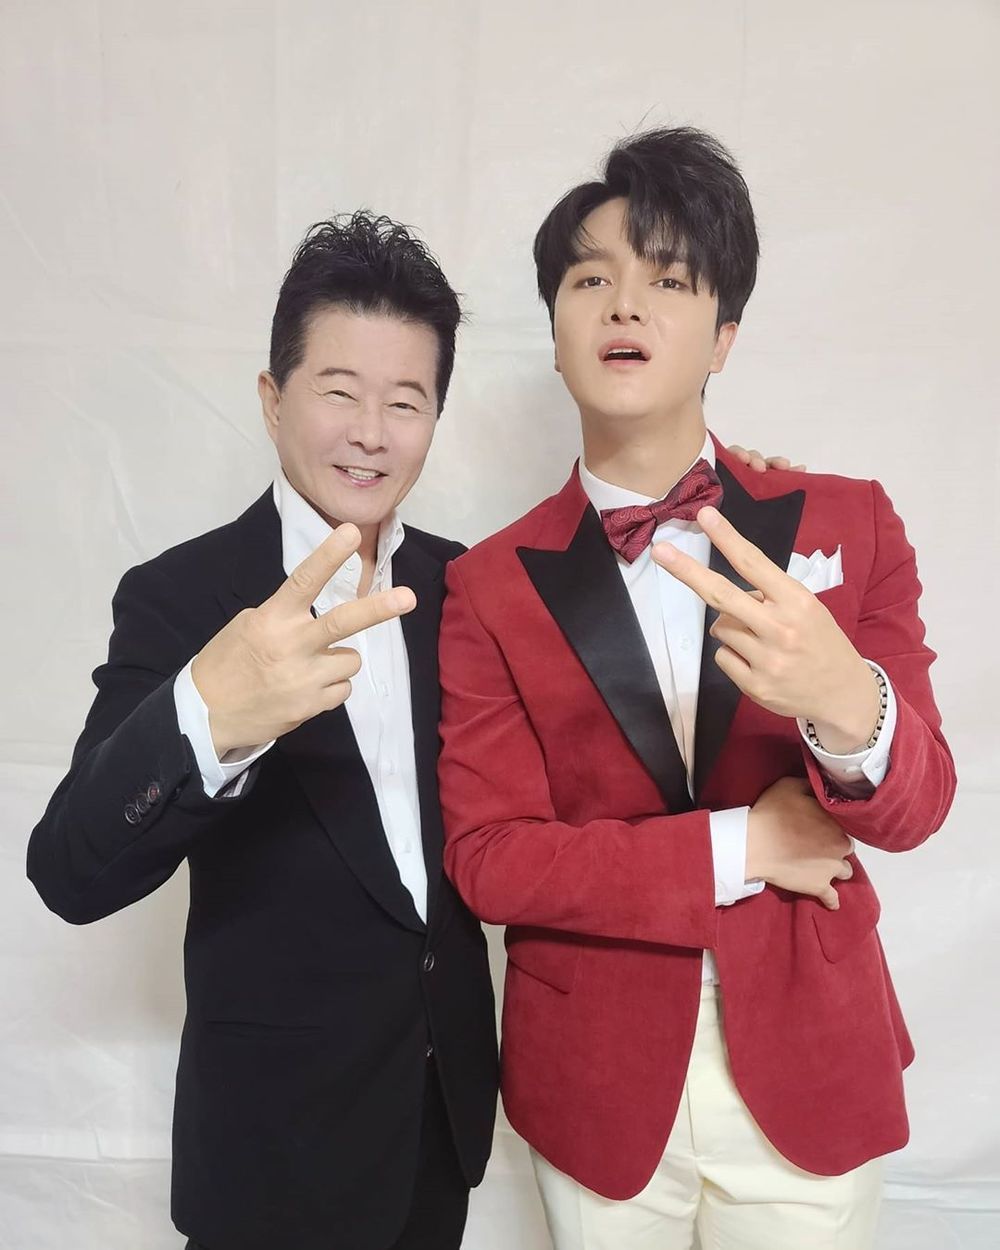 Musical actor and singer newcomer released a photo taken with Tae Jin-ah.On October 12, Shin In-sun said to his instagram, #Tae Jin-ah # I love you # Shin In-sun #Tae Jin-ah Rainbow 7 and was praised by Tae Jin-ah. Haha Yellow Love is great Mr. Trot Bumblebee Whiting! Thank you very much. Singer #musical actor #Mr.Trot #Tomorrow is Mr. Trot #Mr. Trot Awards #2020Mr.Trot Awards # Jinjinja # Love is anyone # Partner # Ok Kyung # Sorry # Too many 20201001 # Fresh # Samo Song and posted a picture with the article.In the open photo, the rookie poses with a hand heart with Tae Jin-ah, especially the two affectionate figures, which have been warm.On the other hand, Shin In-sun appeared on KBS1s Morning Yard and made headlines by mentioning his fathers story. Shin In-suns father is a former lawmaker and lawyer, Shin Ki-nam.Yeji Lee